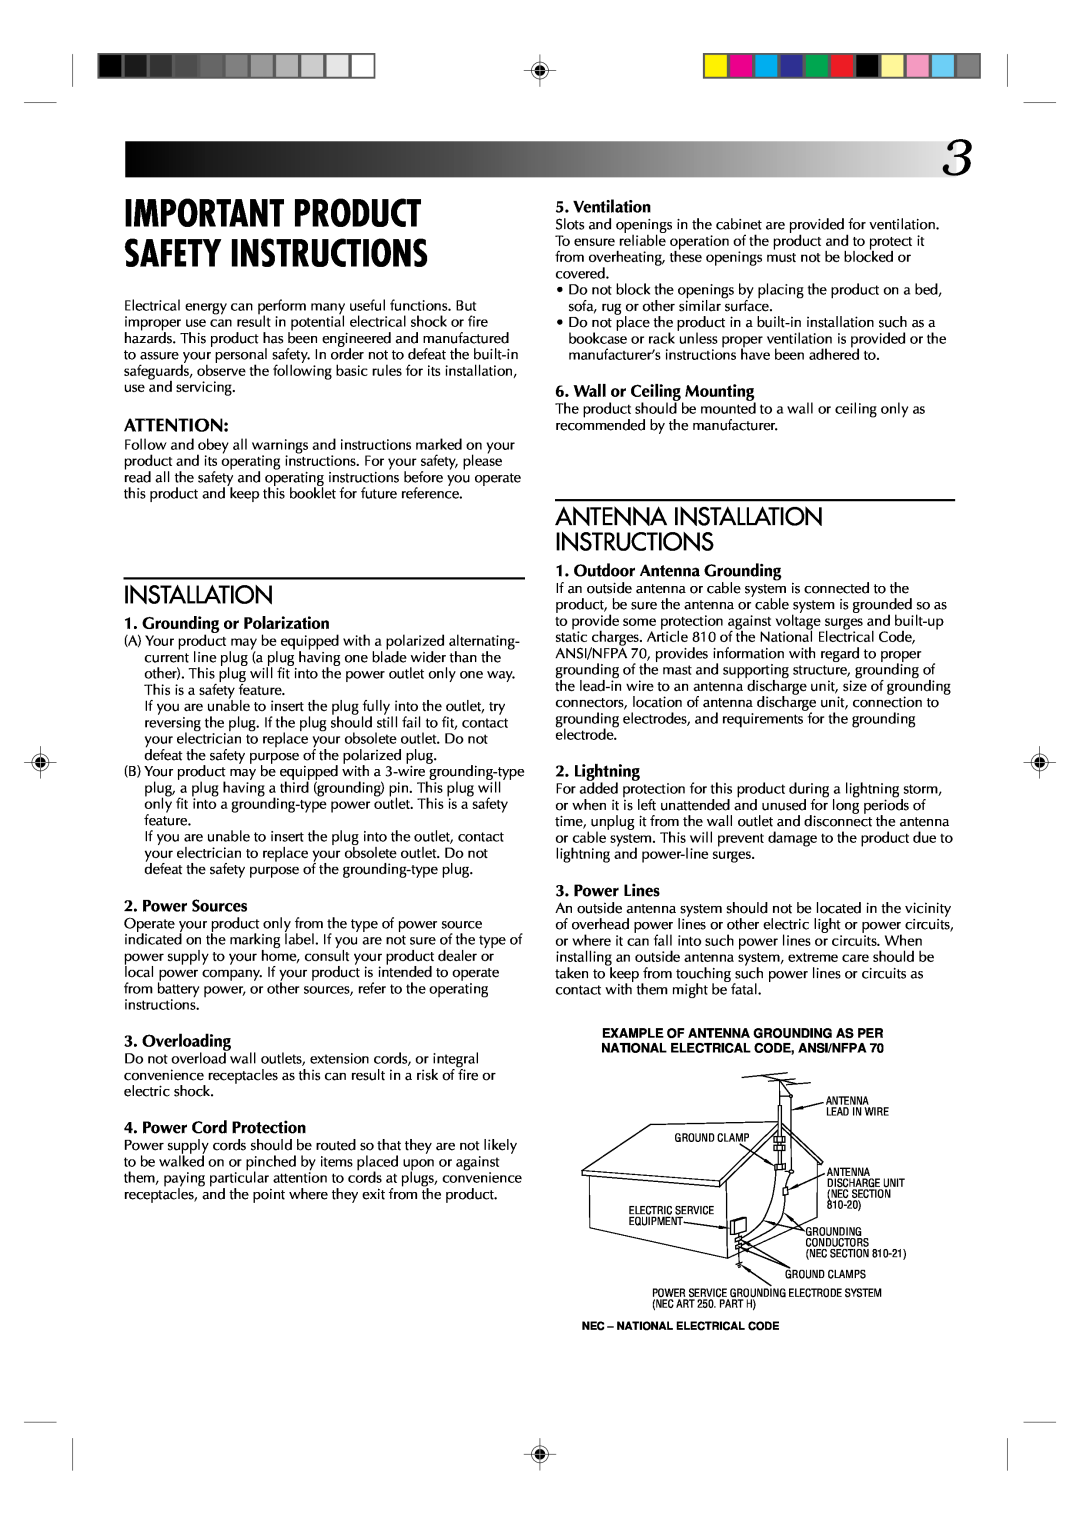 JVC HR-VP434U manual Important Product Safety Instructions, Antenna Installation Instructions 